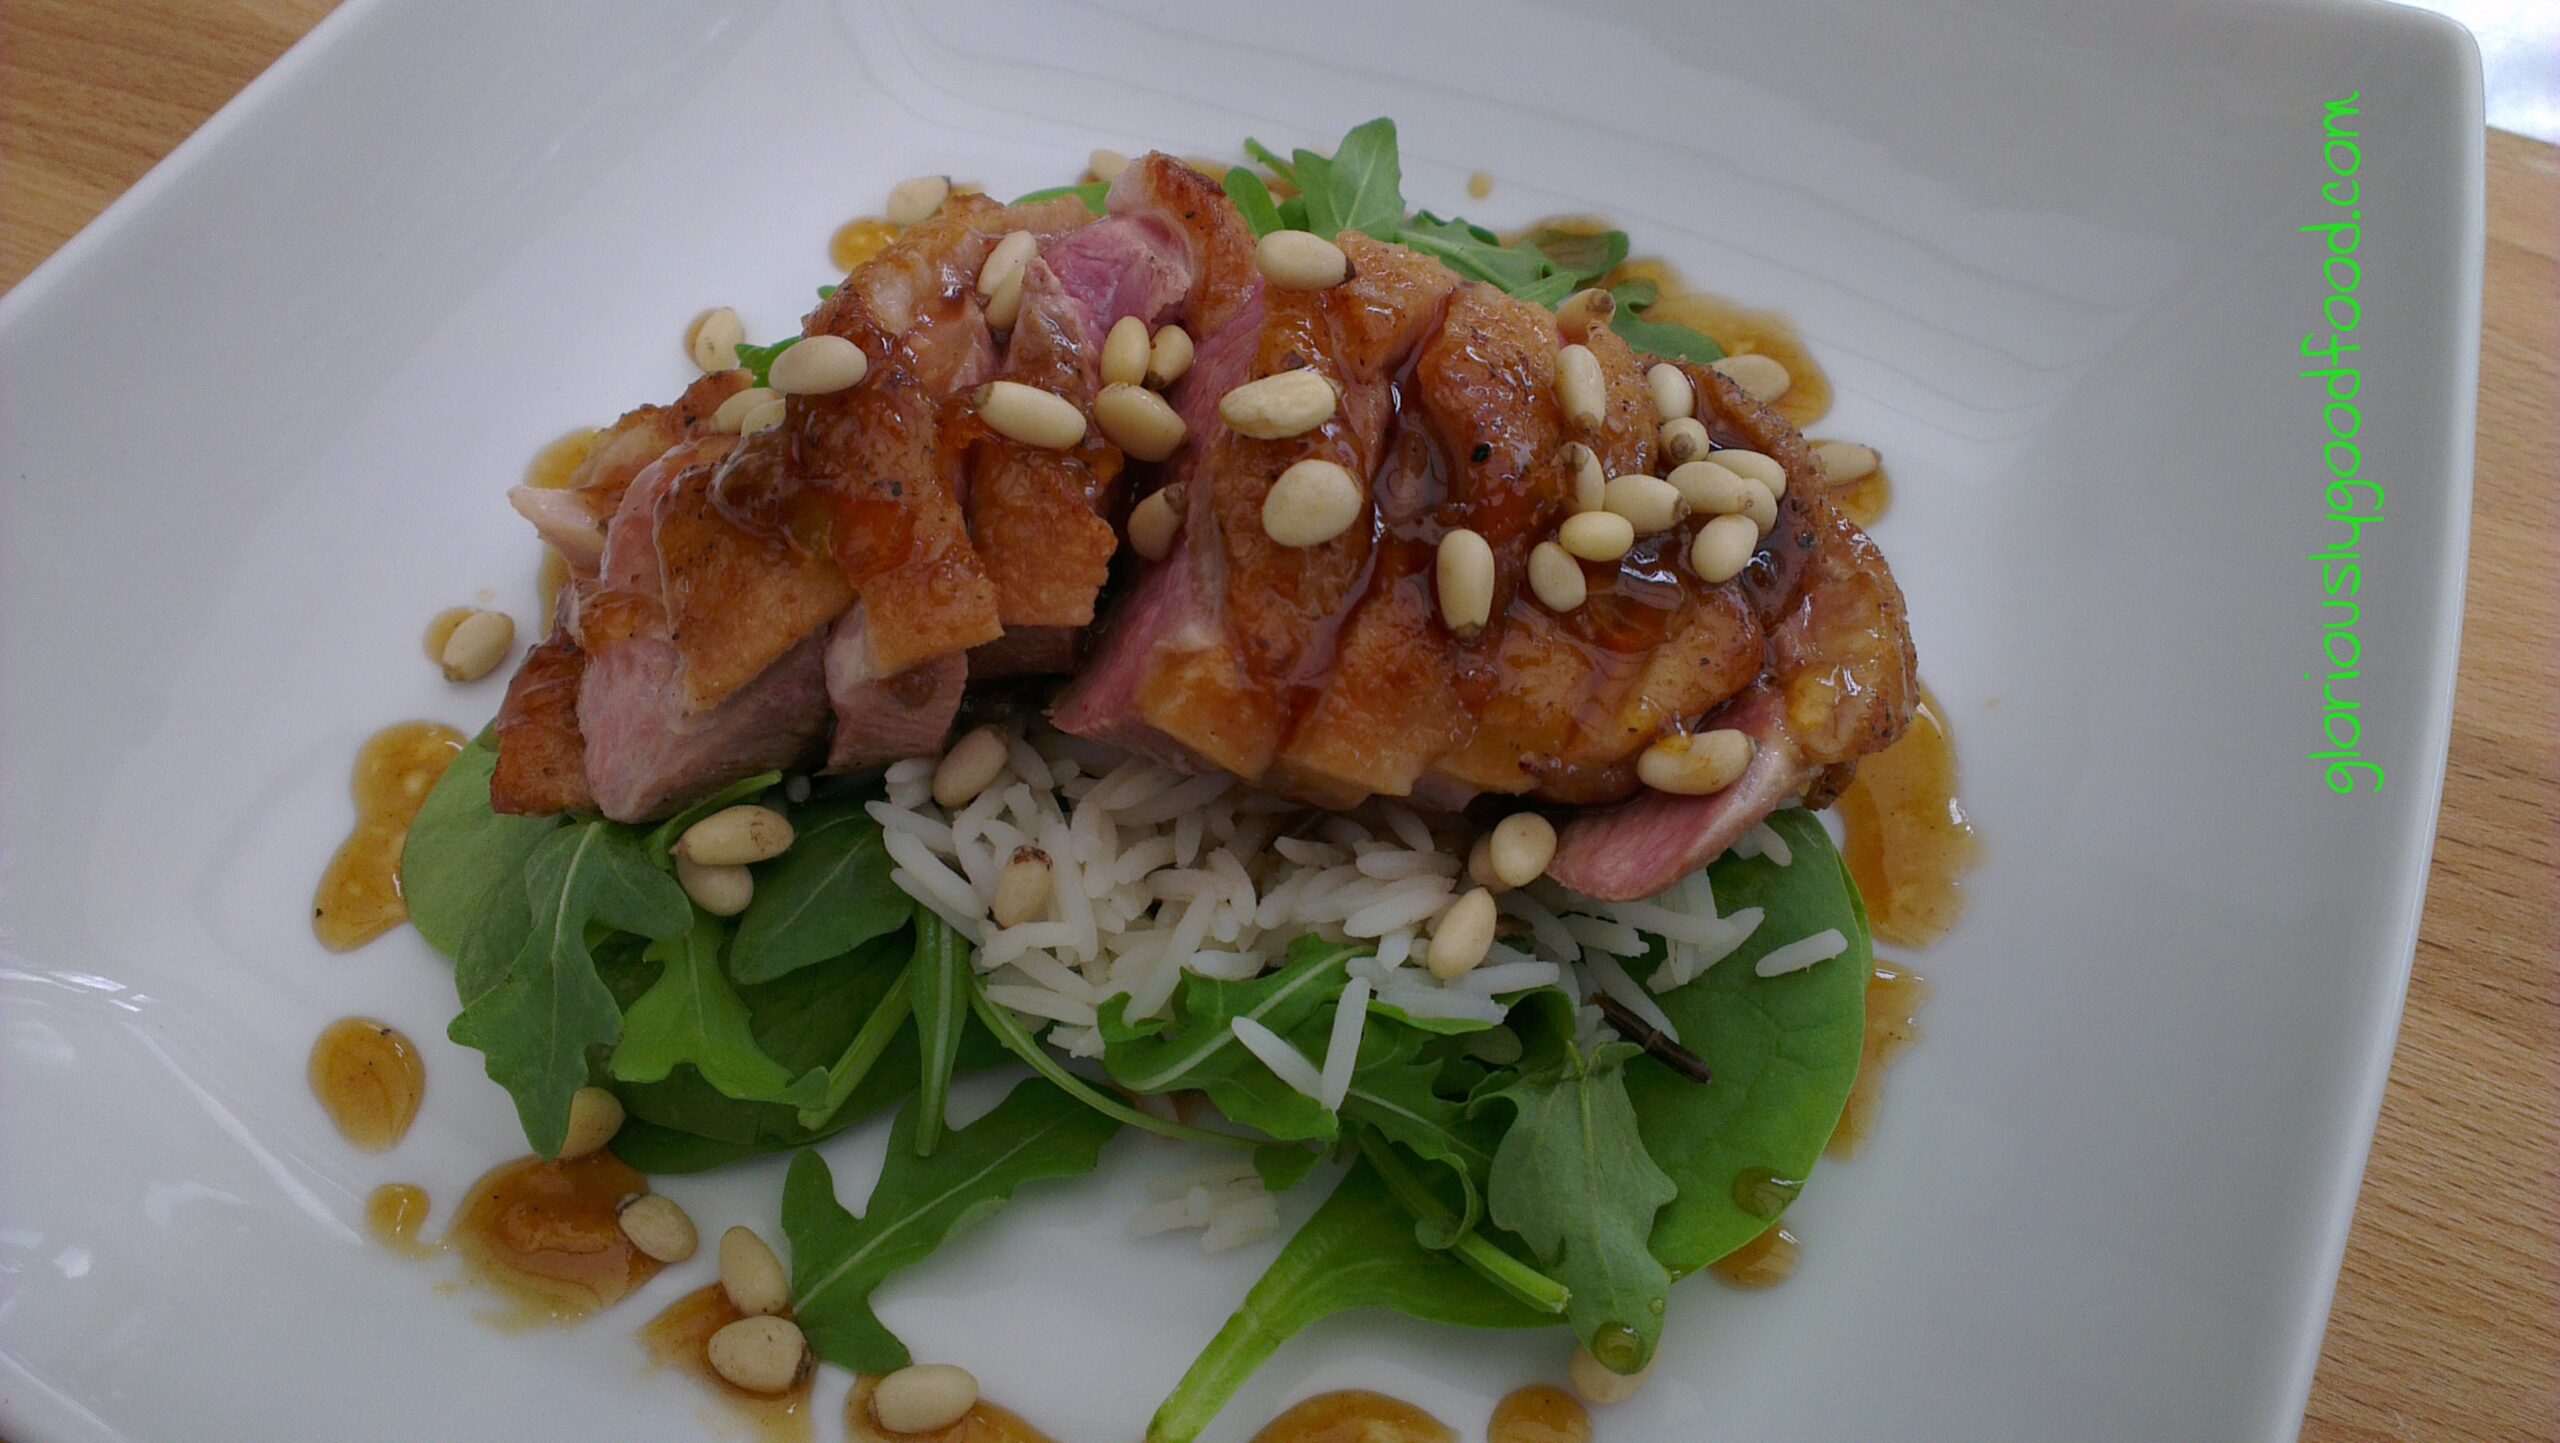 Warm Duck and Pine Nut Salad with Wild Rice and an Orange and Balsamic Vinegar Dressing